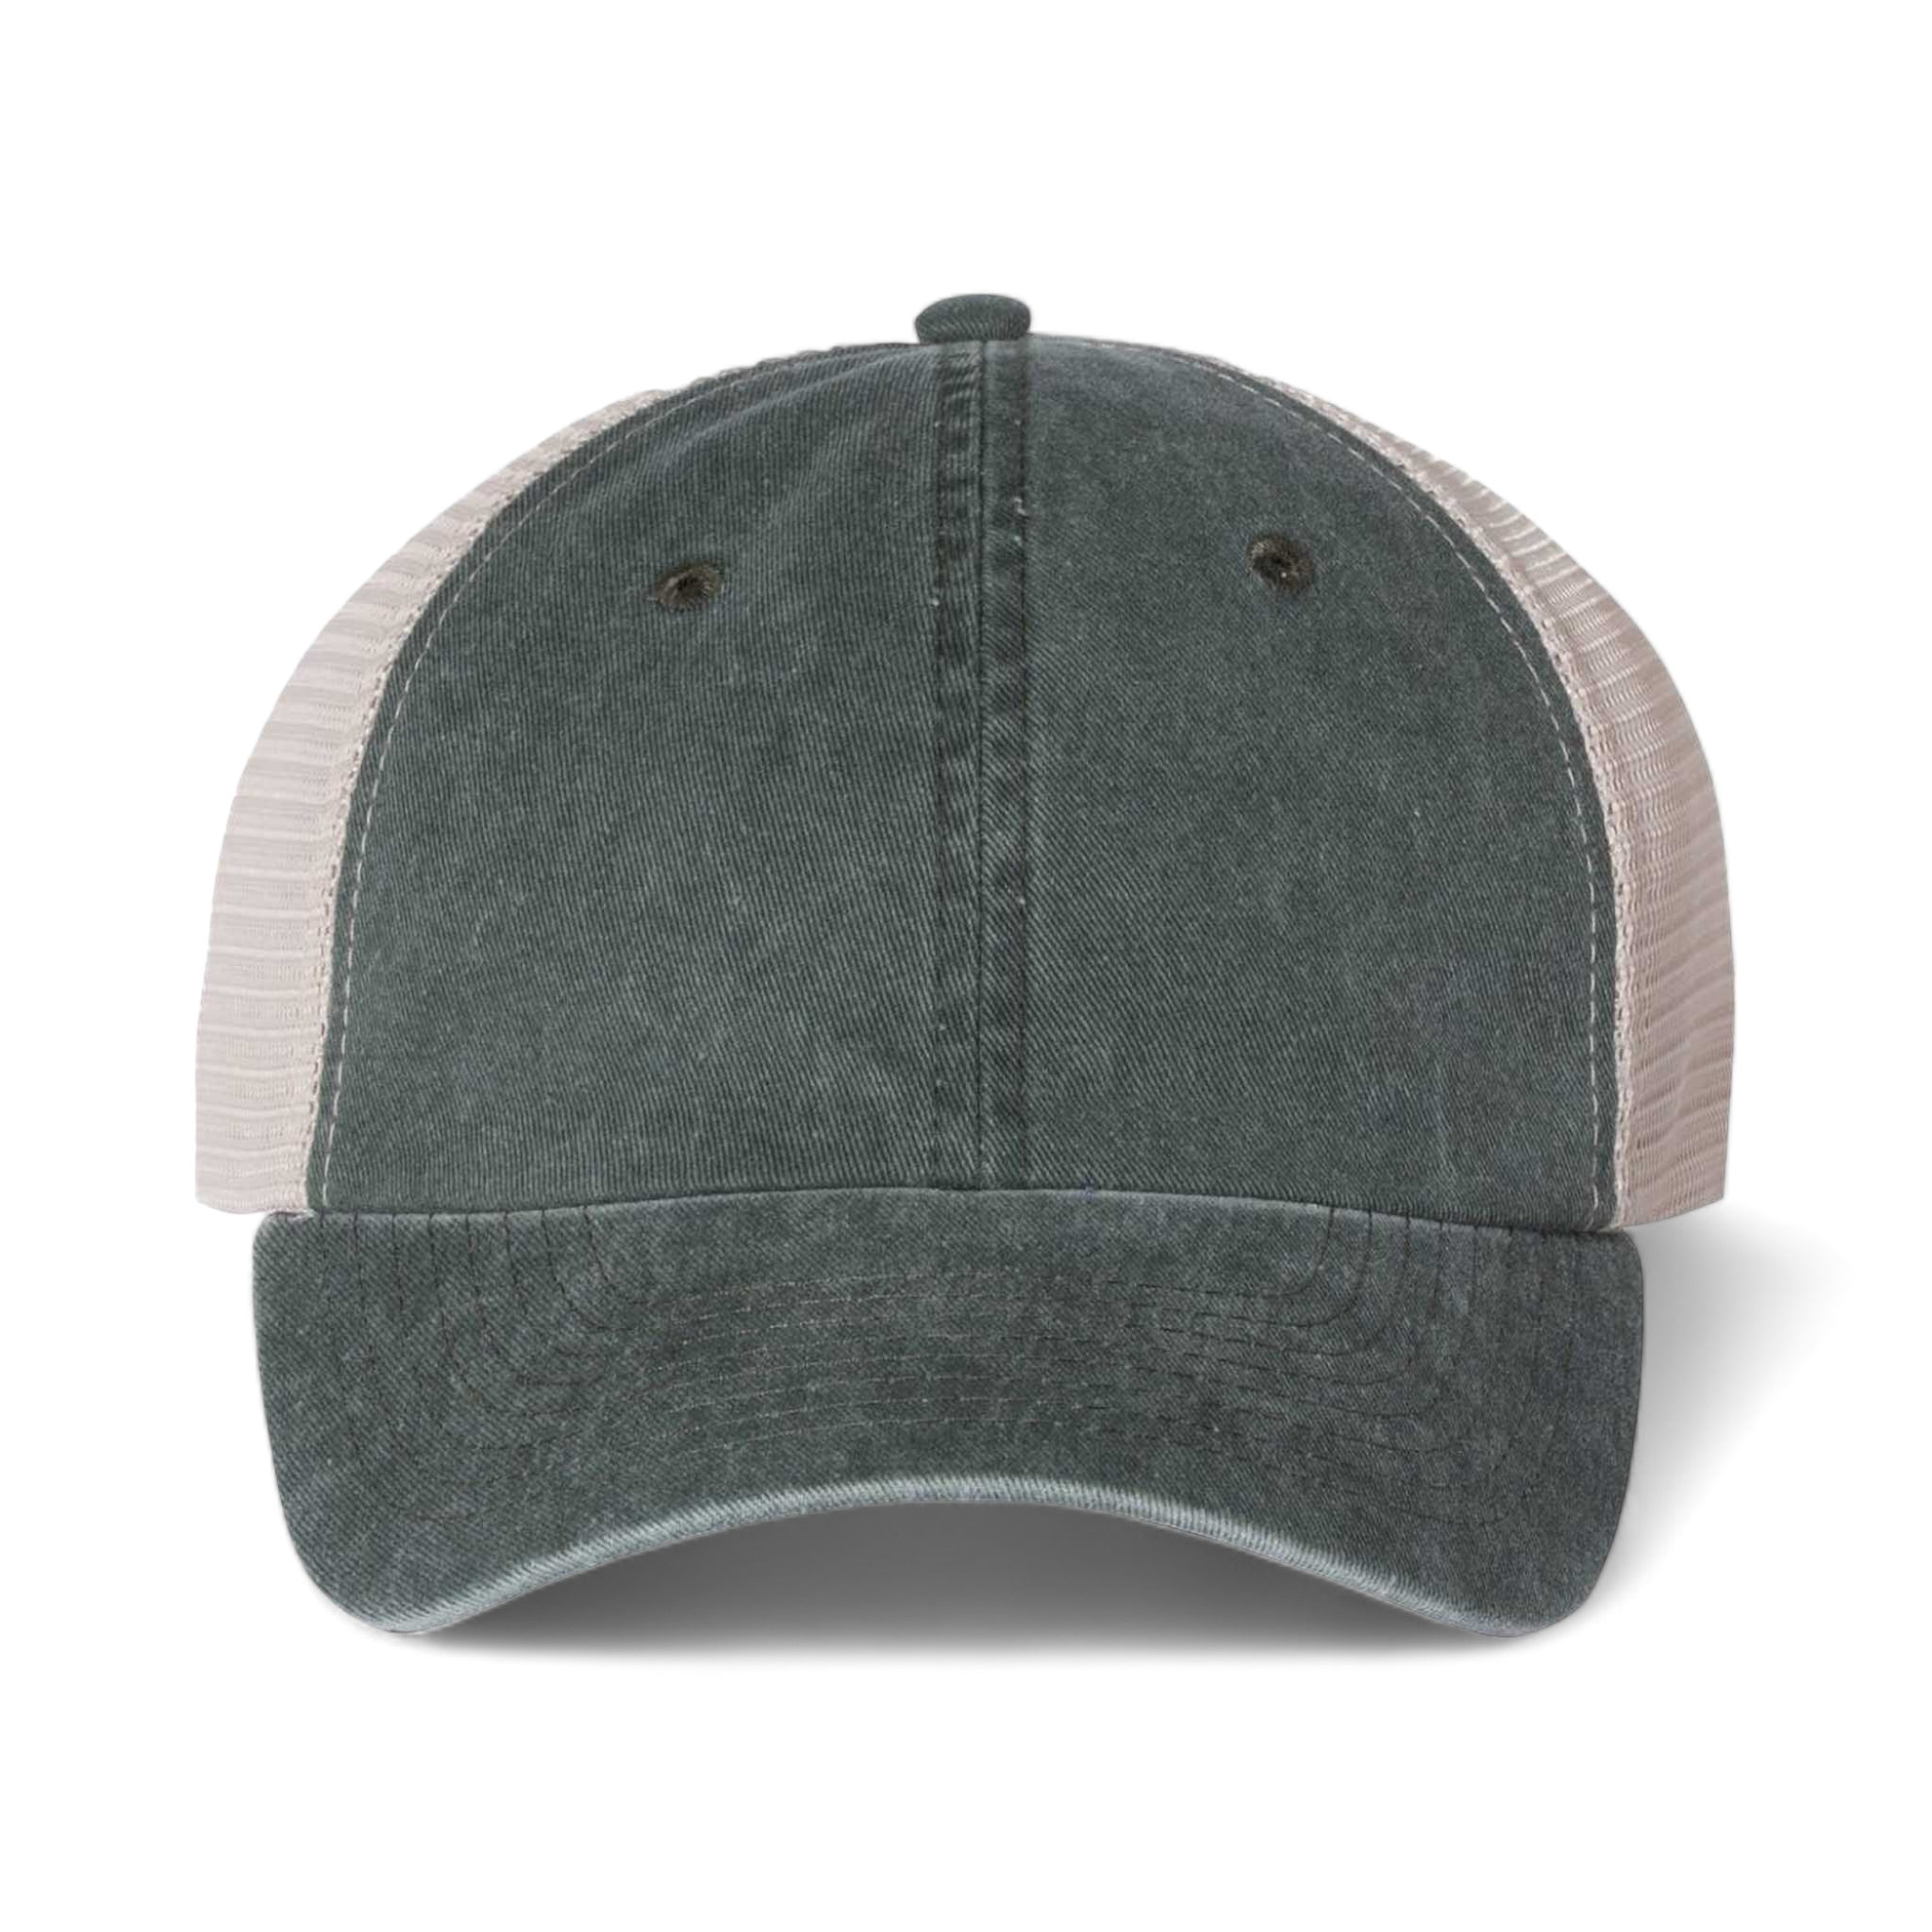 Front view of Sportsman SP510 custom hat in forest and stone